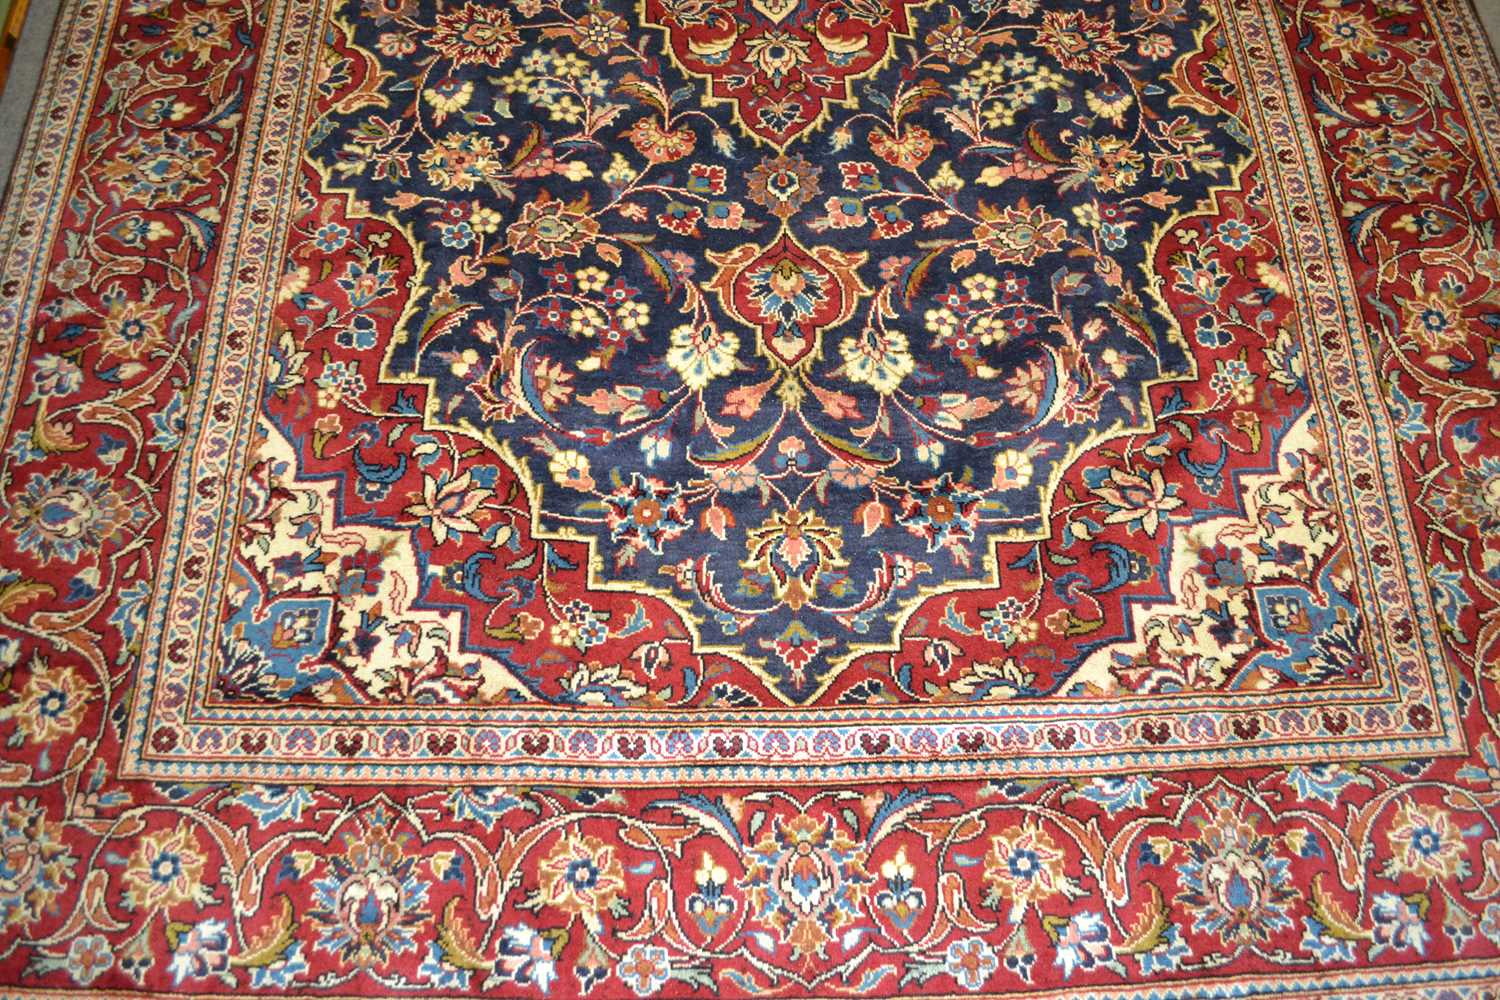 A Modern Iranian Kashan rug with large central floral panel, 300 x 195cm - Image 2 of 2